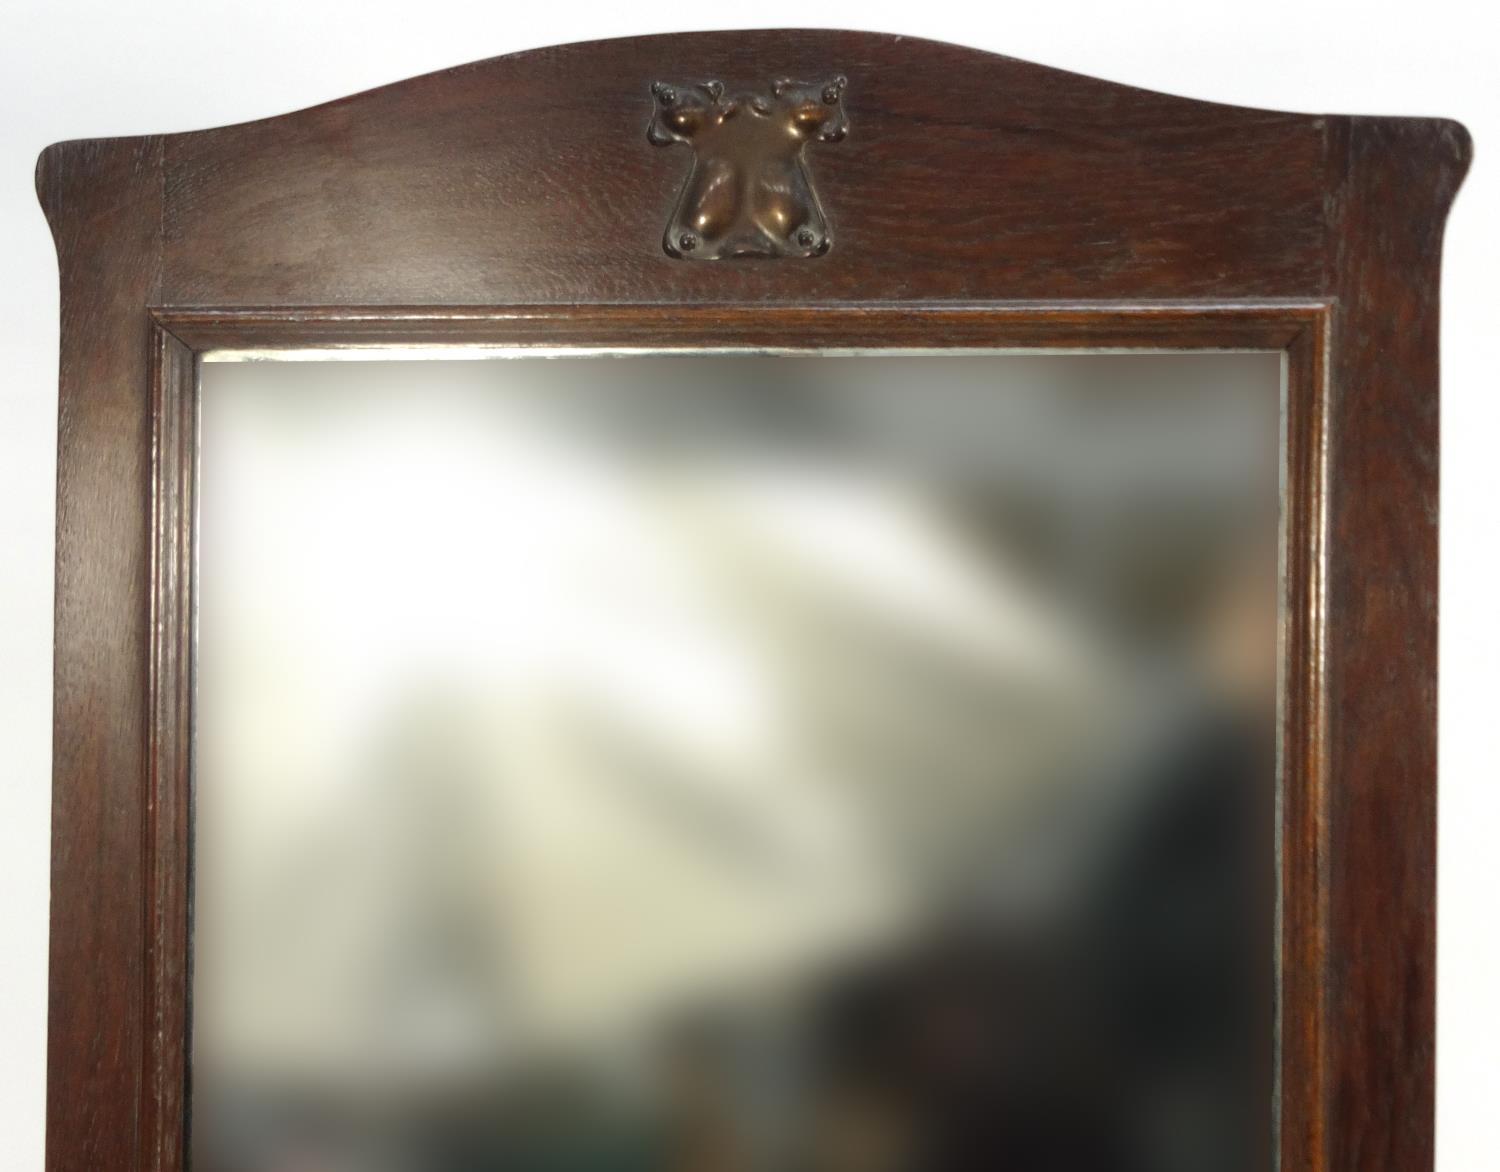 Arts and crafts oak hall mirror with brass plaque and cupboard base, 180cm high x 61cm wide x 43cm - Image 4 of 5